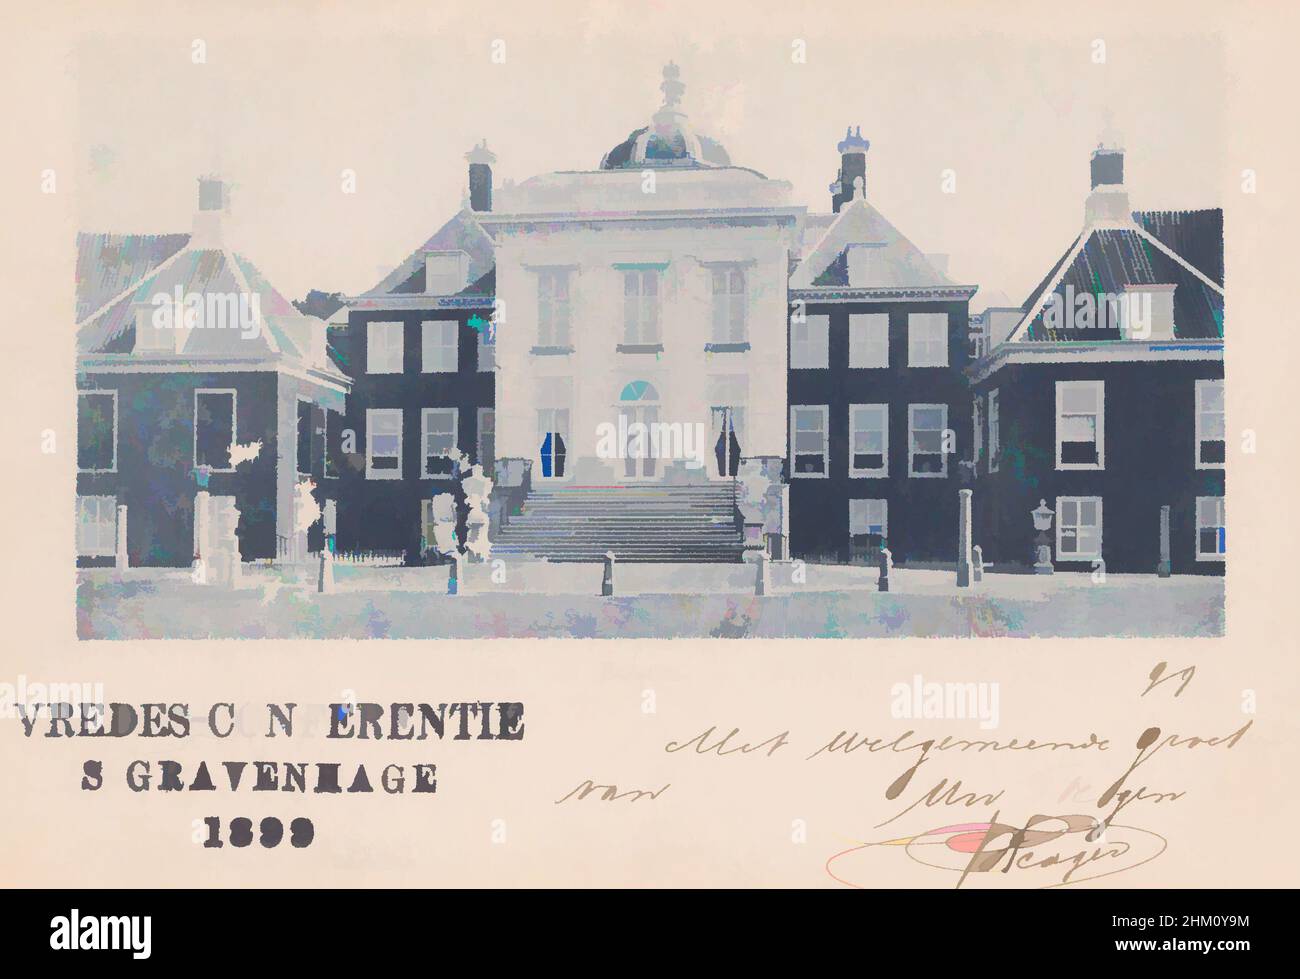 Art inspired by Het huis Ten Bosch - 's Gravenhage, maker:, publisher: A.M. Amiot, The Hague, 17-Jun-1899, cardboard, collotype, writing (processes), height 93 mm × width 137 mm, Classic works modernized by Artotop with a splash of modernity. Shapes, color and value, eye-catching visual impact on art. Emotions through freedom of artworks in a contemporary way. A timeless message pursuing a wildly creative new direction. Artists turning to the digital medium and creating the Artotop NFT Stock Photo